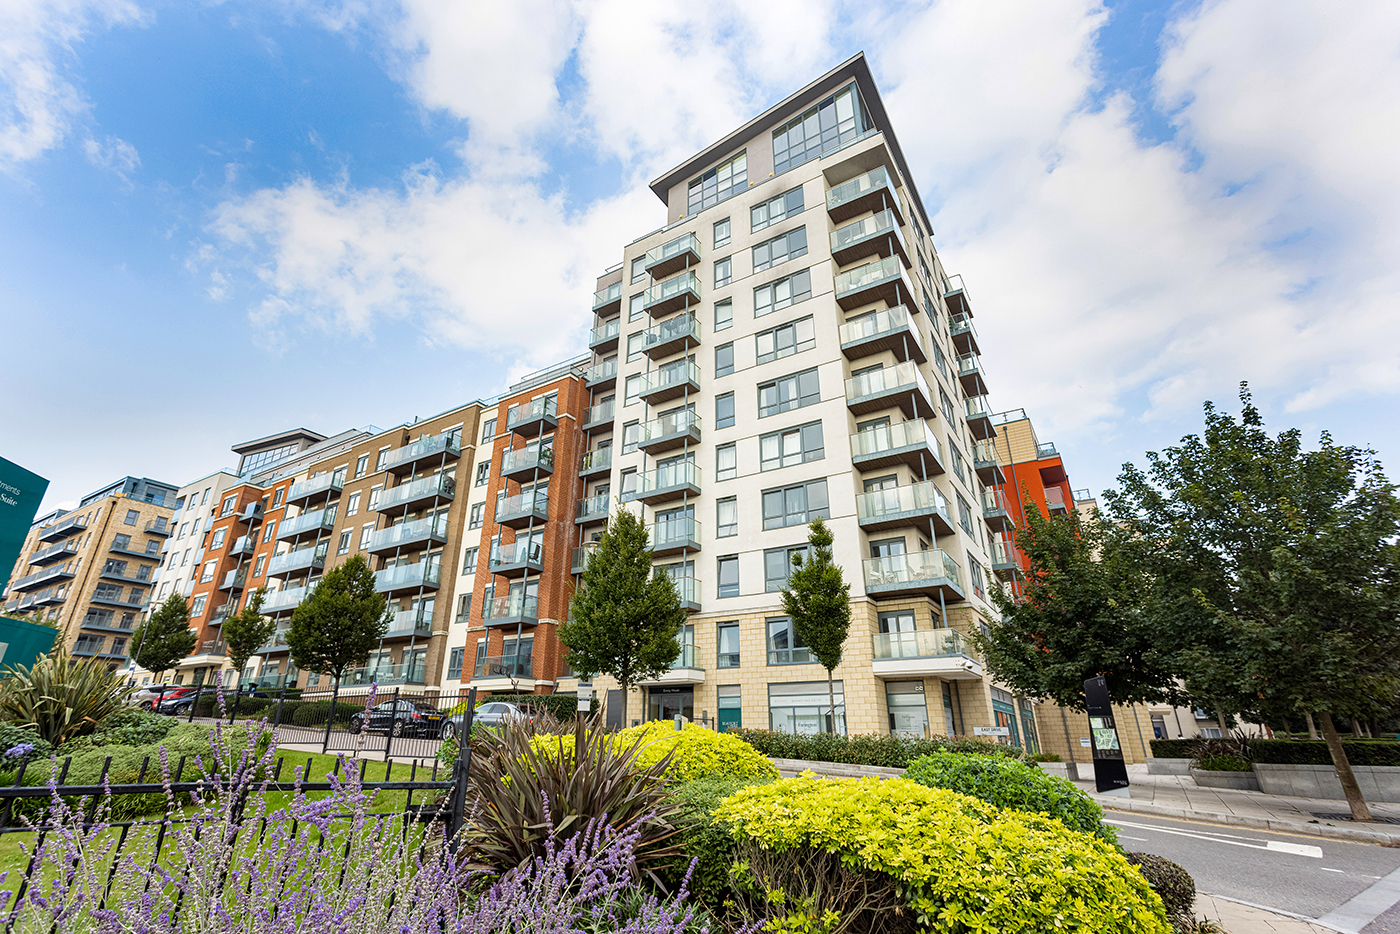 Studio apartments/flats to sale in East Drive, Colindale, London-image 8